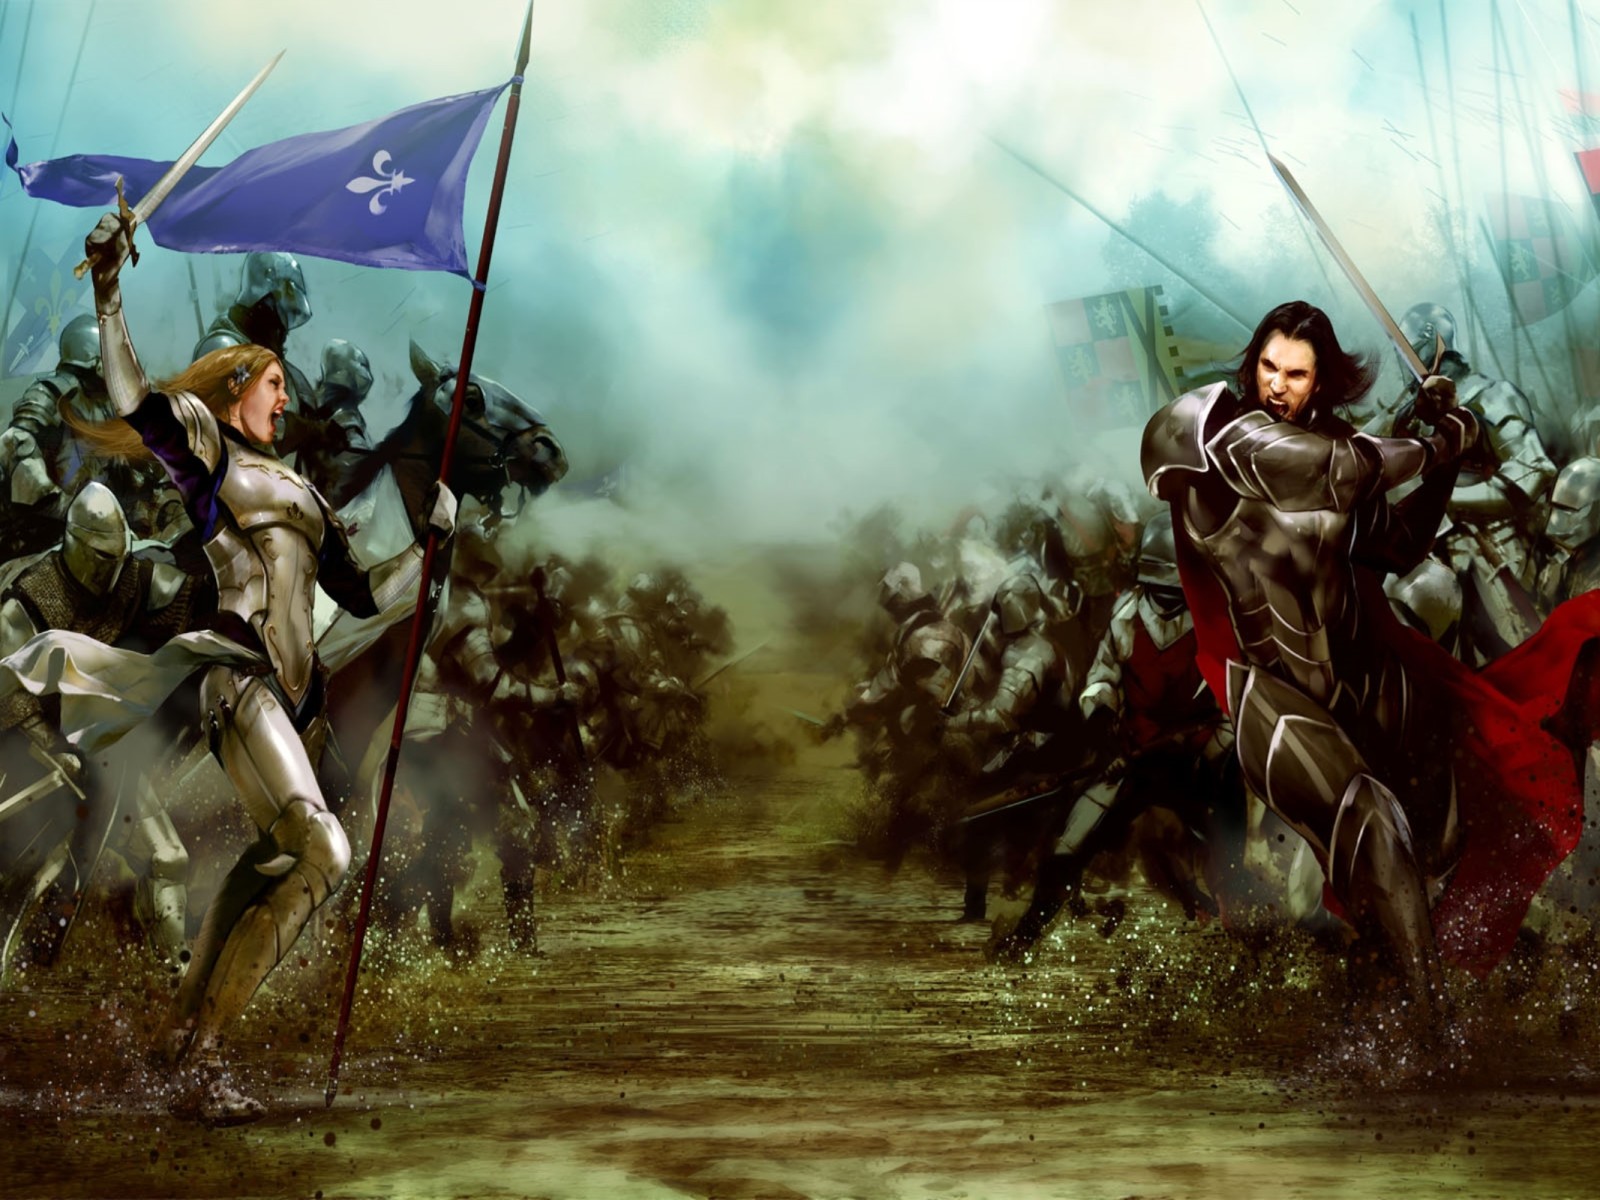 Bladestorm: The Hundred Years' War Backgrounds, Compatible - PC, Mobile, Gadgets| 1600x1200 px